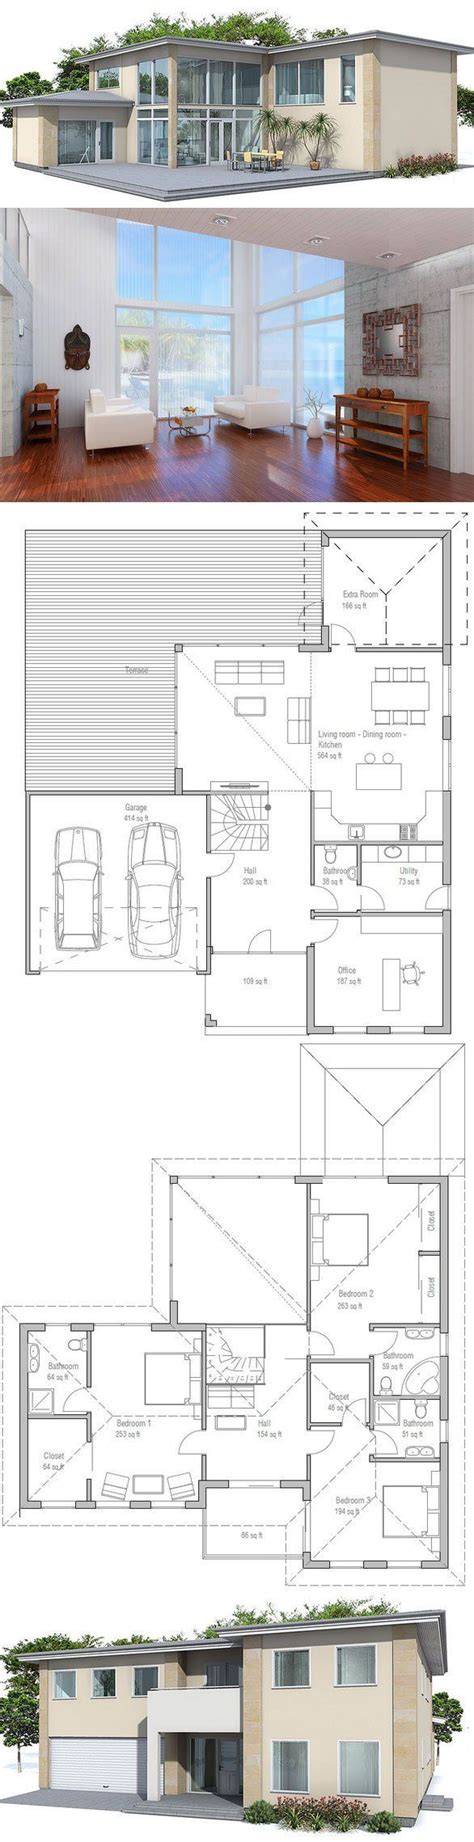 Pin By ConceptHome On House Plans Pinterest Small House